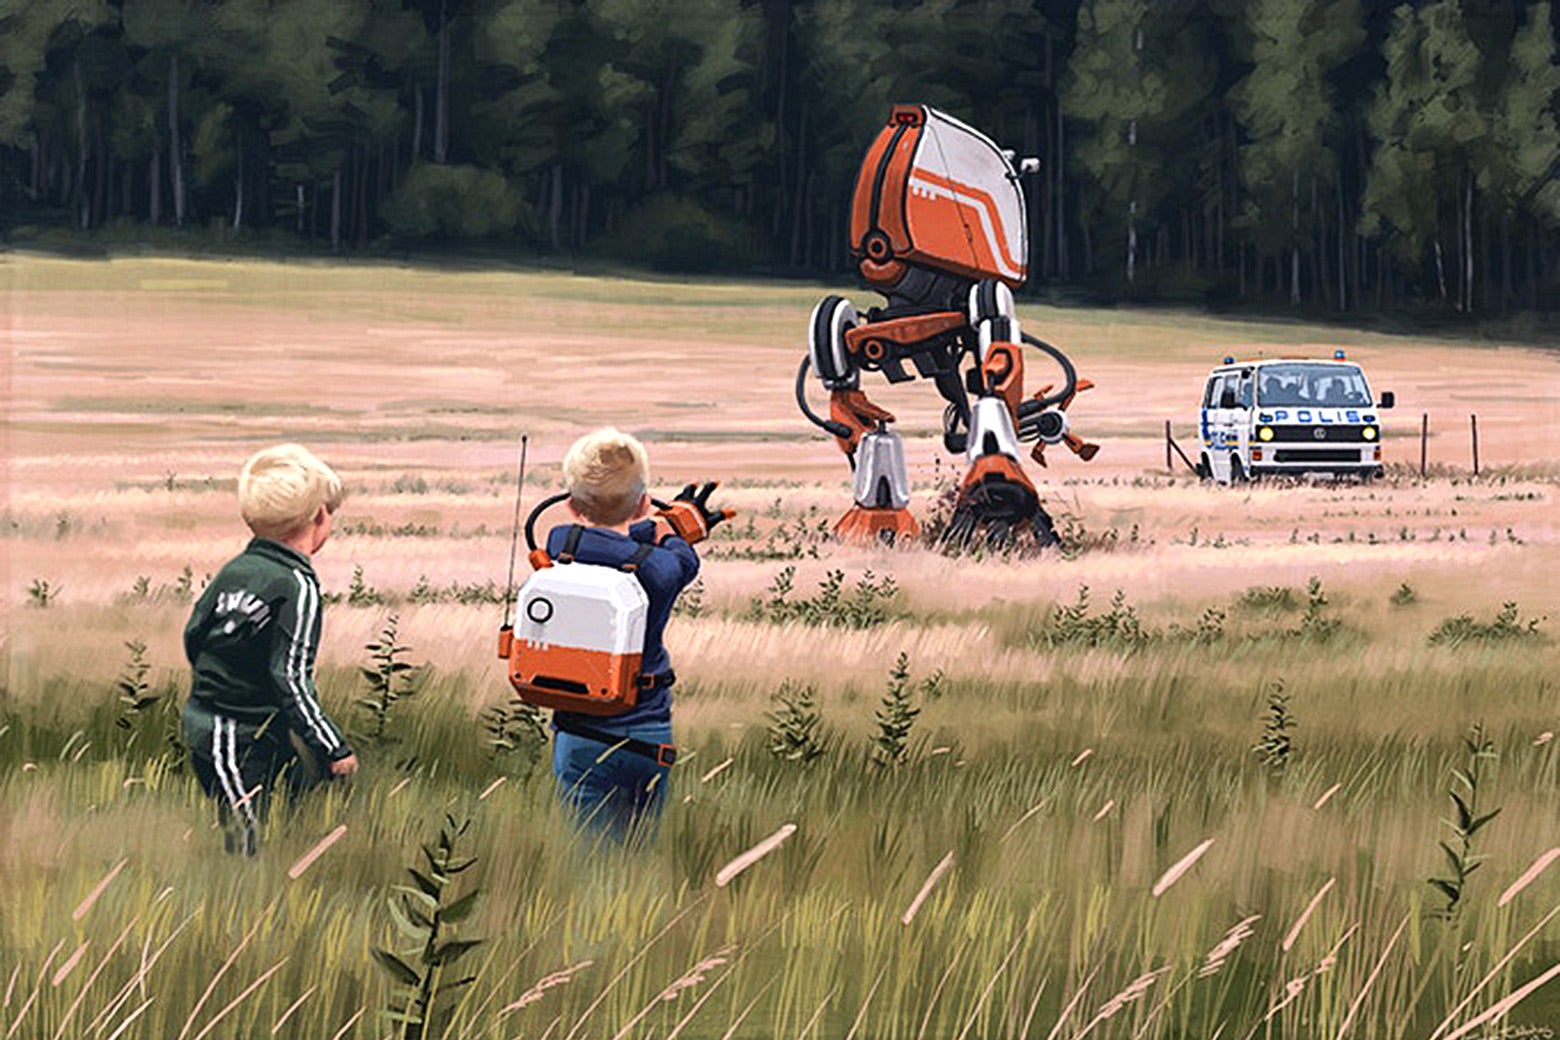 Two children encountering a robot in a field.